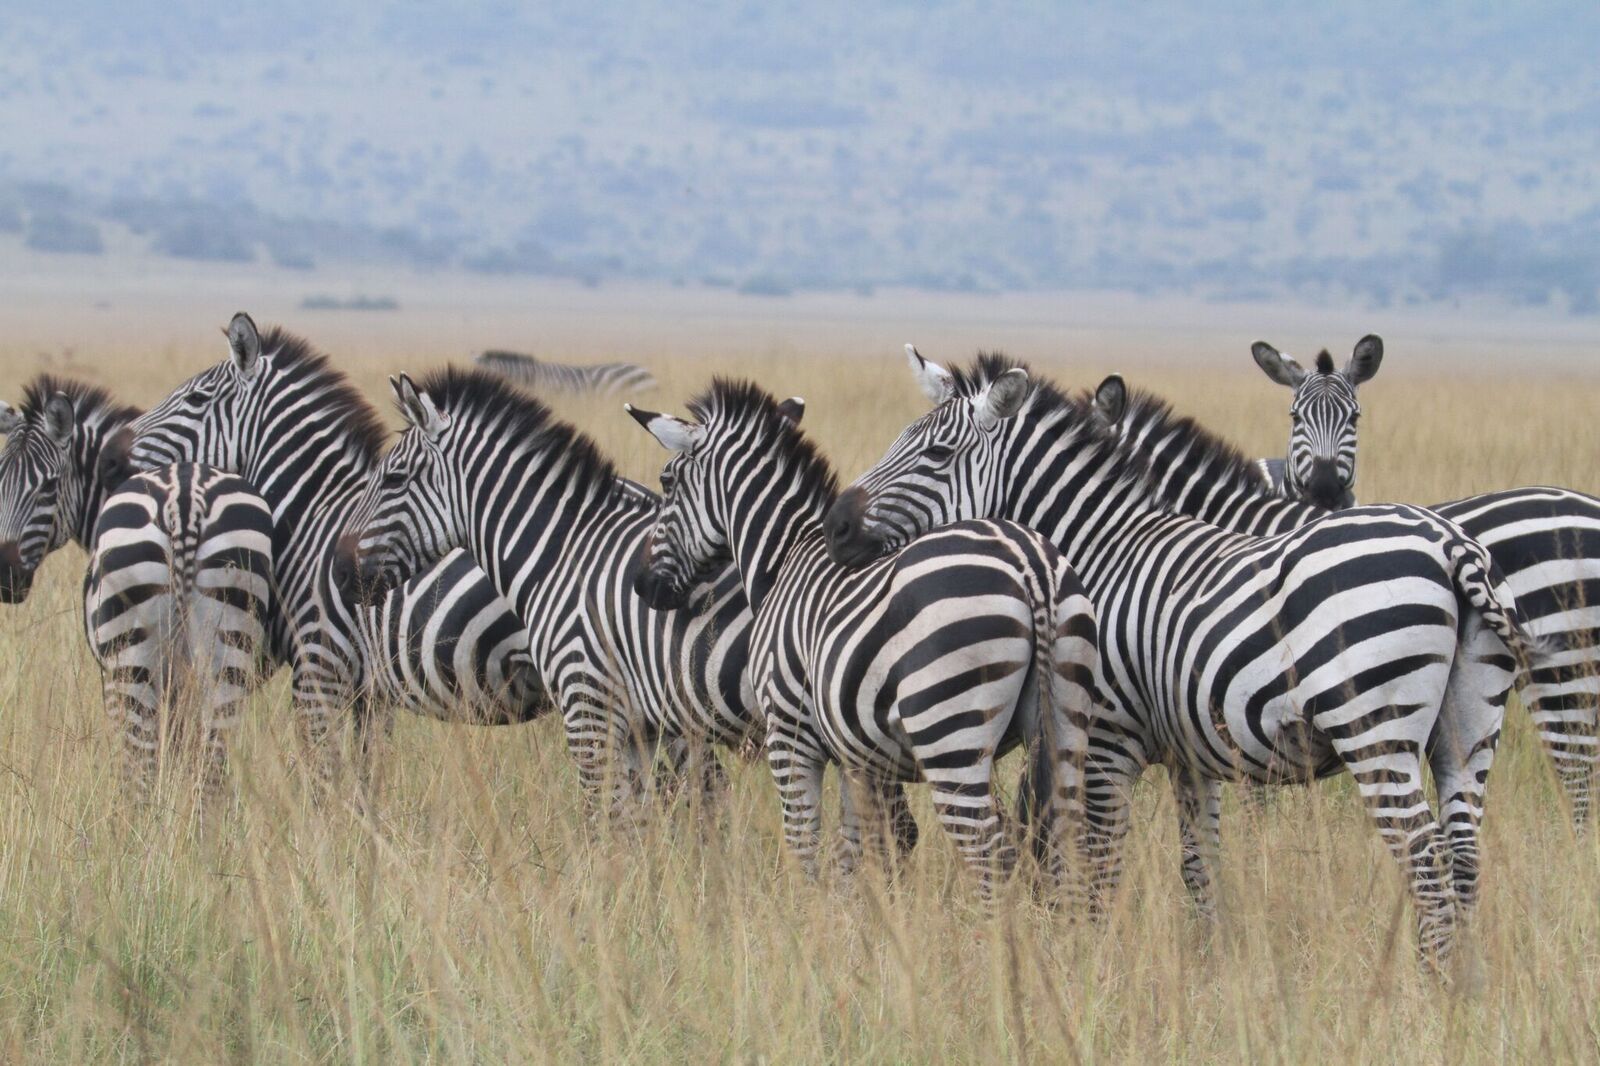 A herd of zebras is a common sighting while on your Rwanda Wildlife Safari in Akagera National Park.